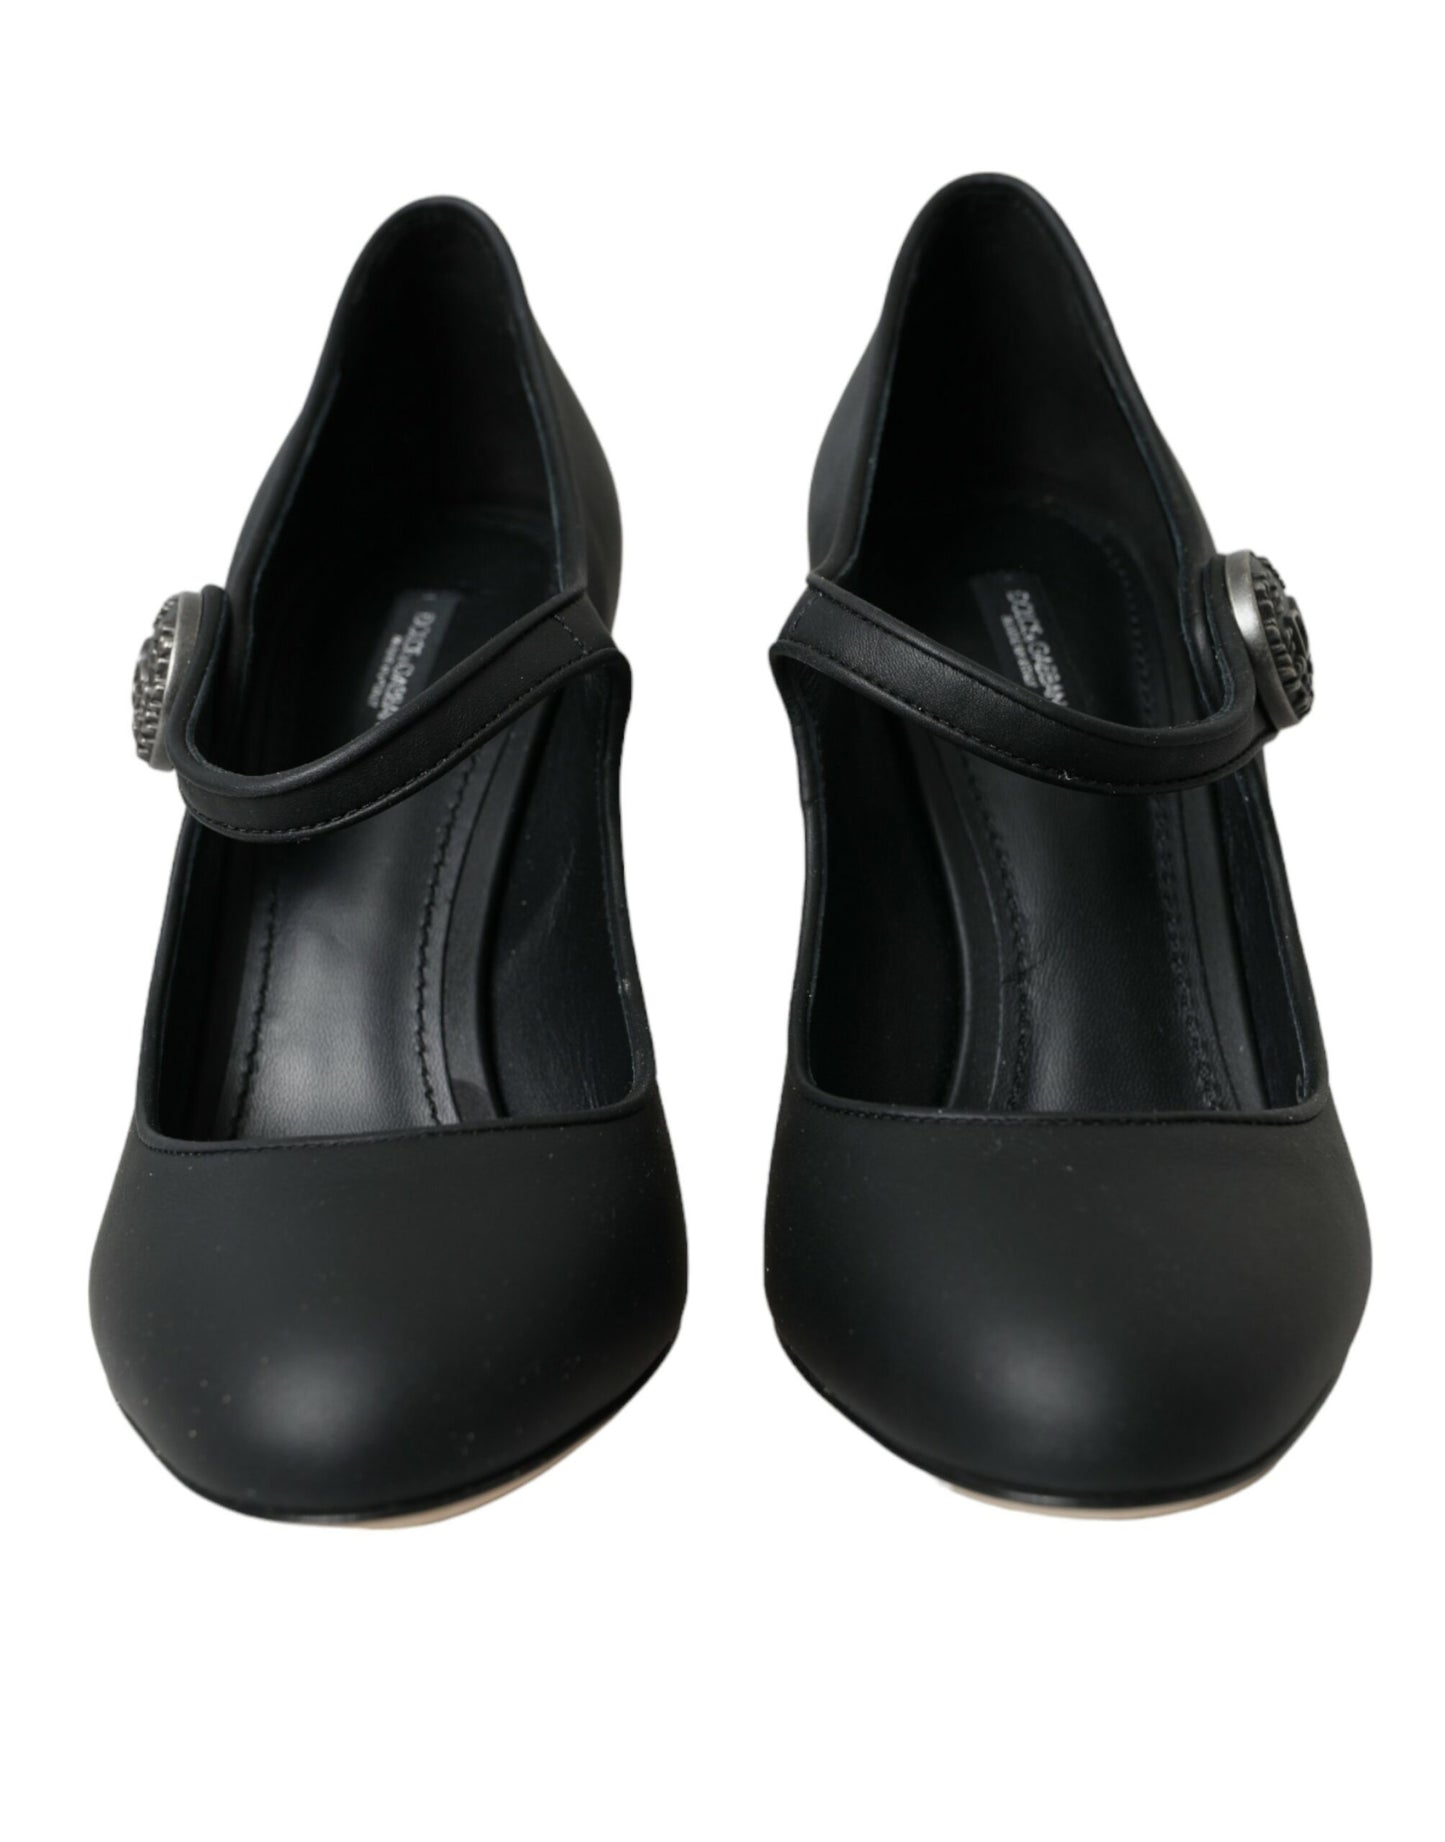 Dolce & Gabbana Black Leather Mary Jane Pumps Heels Shoes